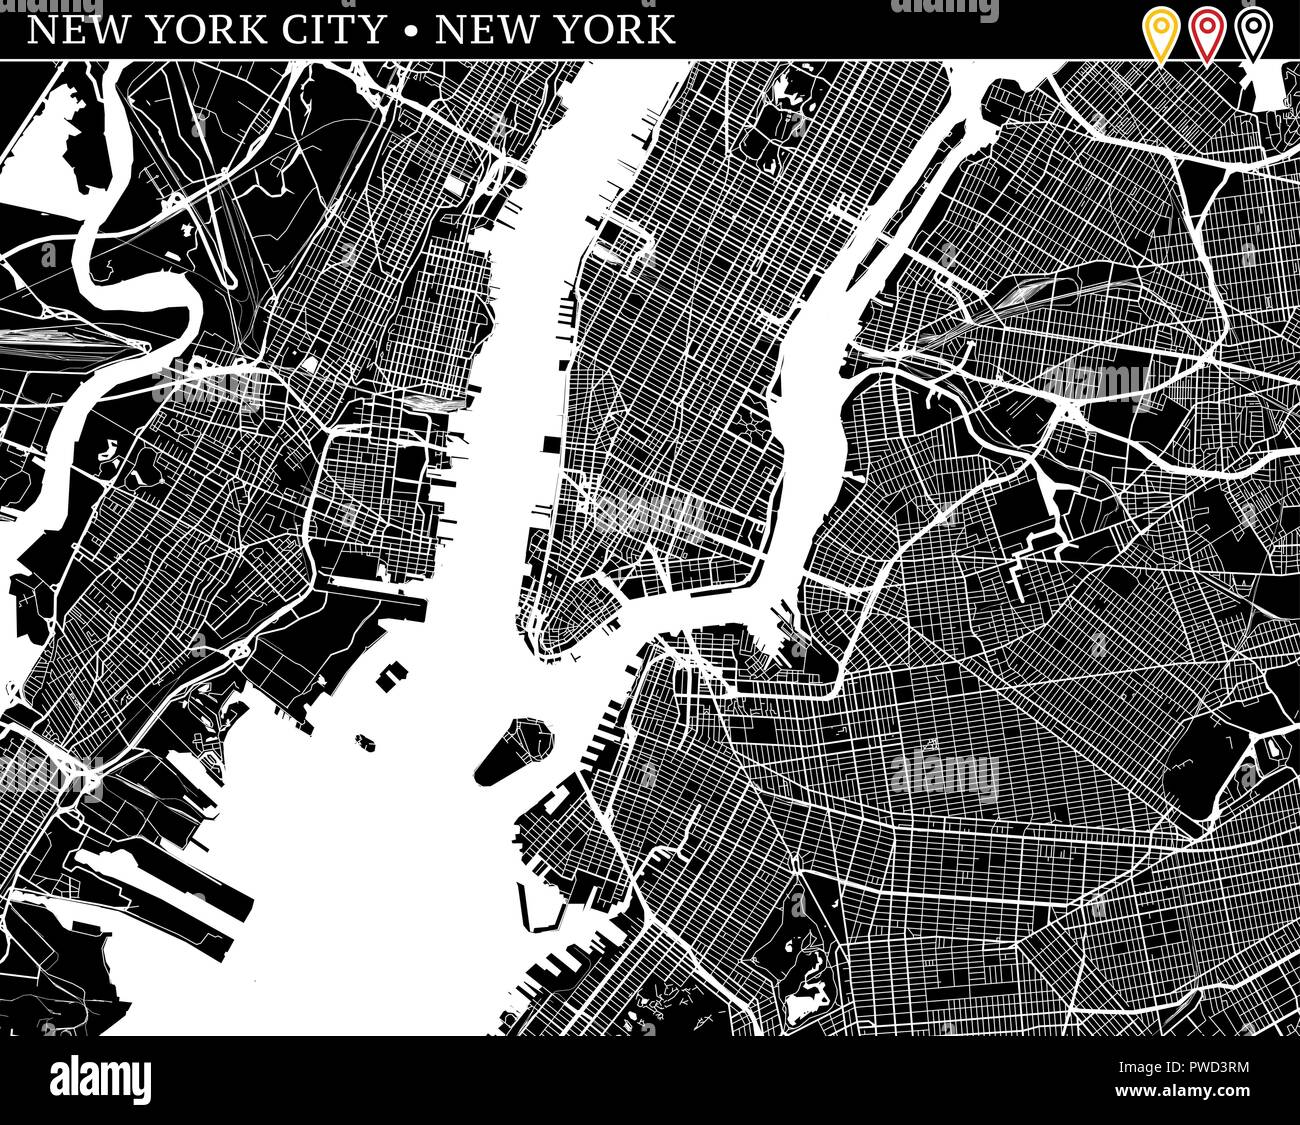 simple map of new york black and white Simple Map Of New York City New York Usa Black And White simple map of new york black and white